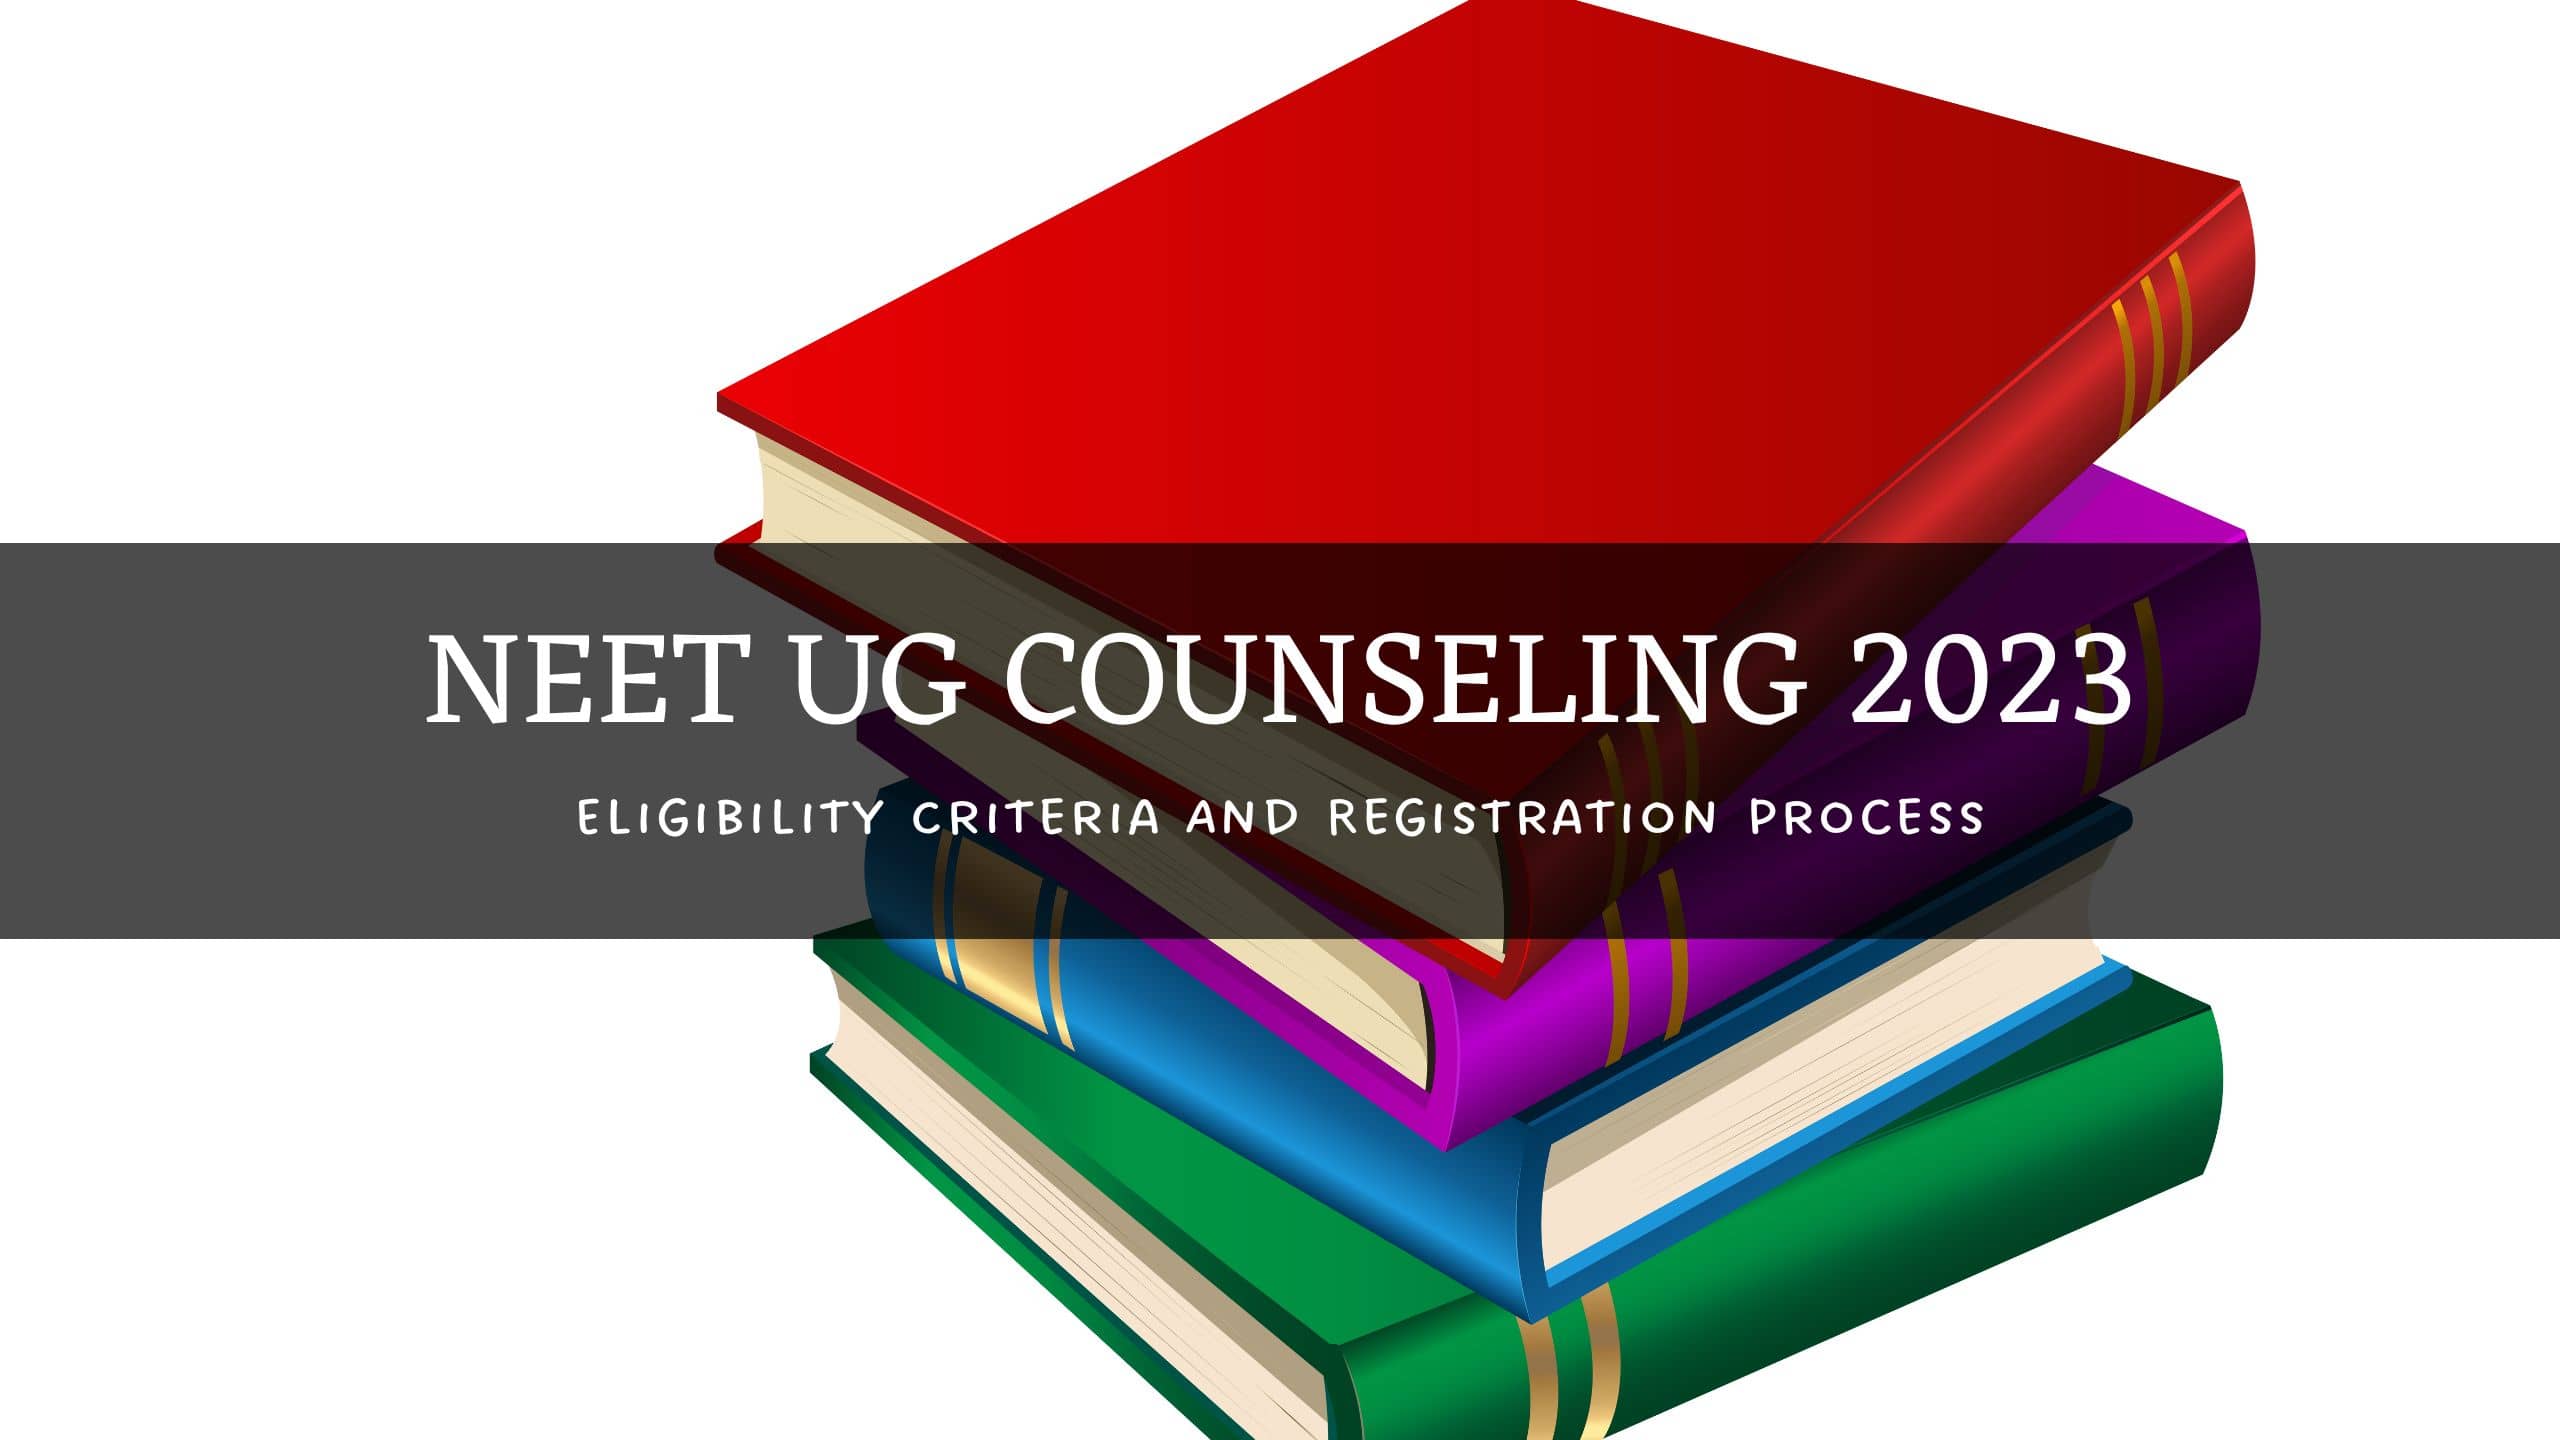 Eligibility Criteria For NEET UG Counseling 2023